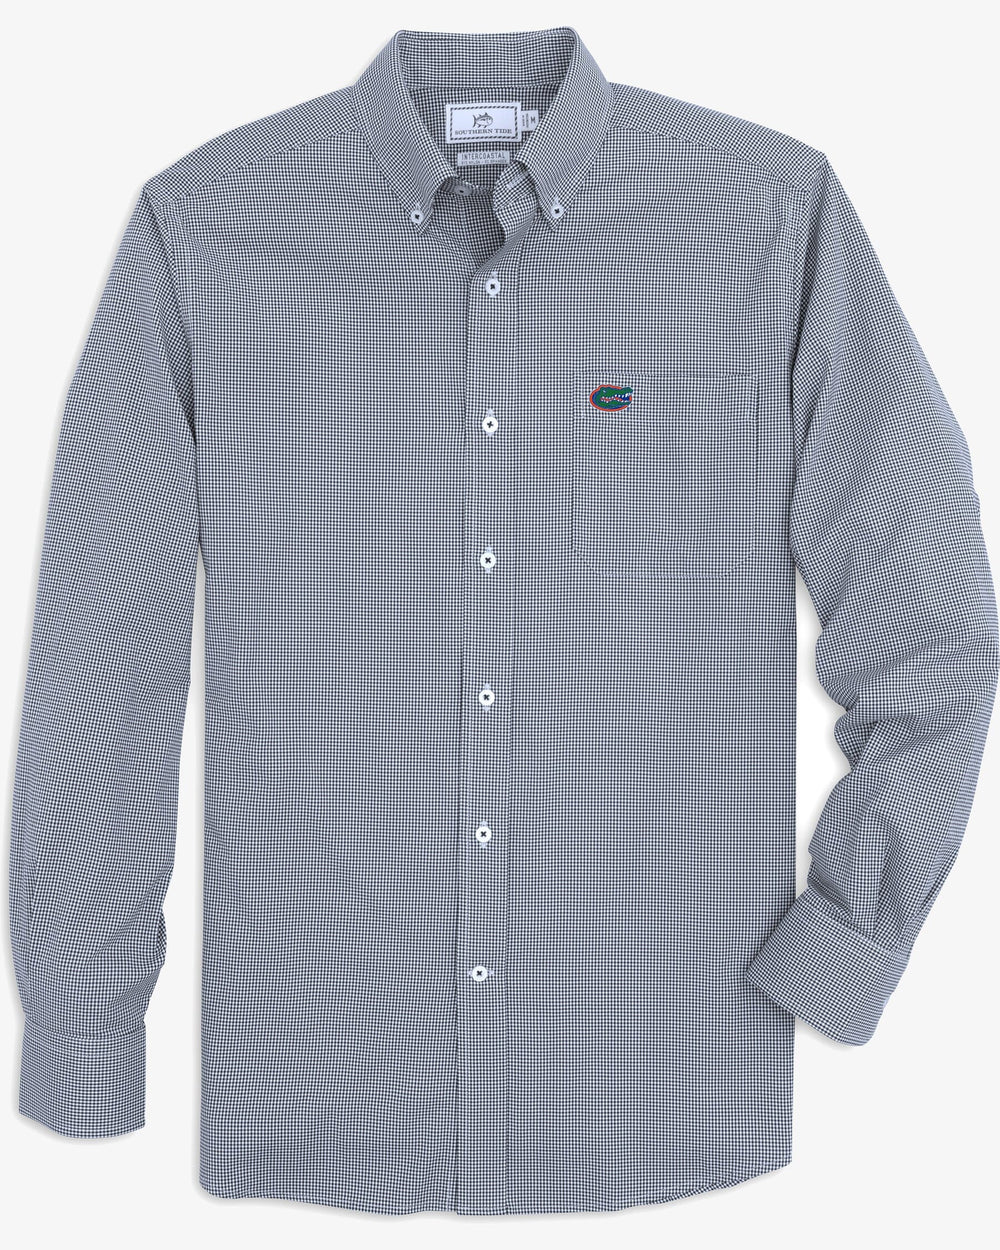 The front view of the Florida Gators Gingham Button Down Shirt by Southern Tide - Navy